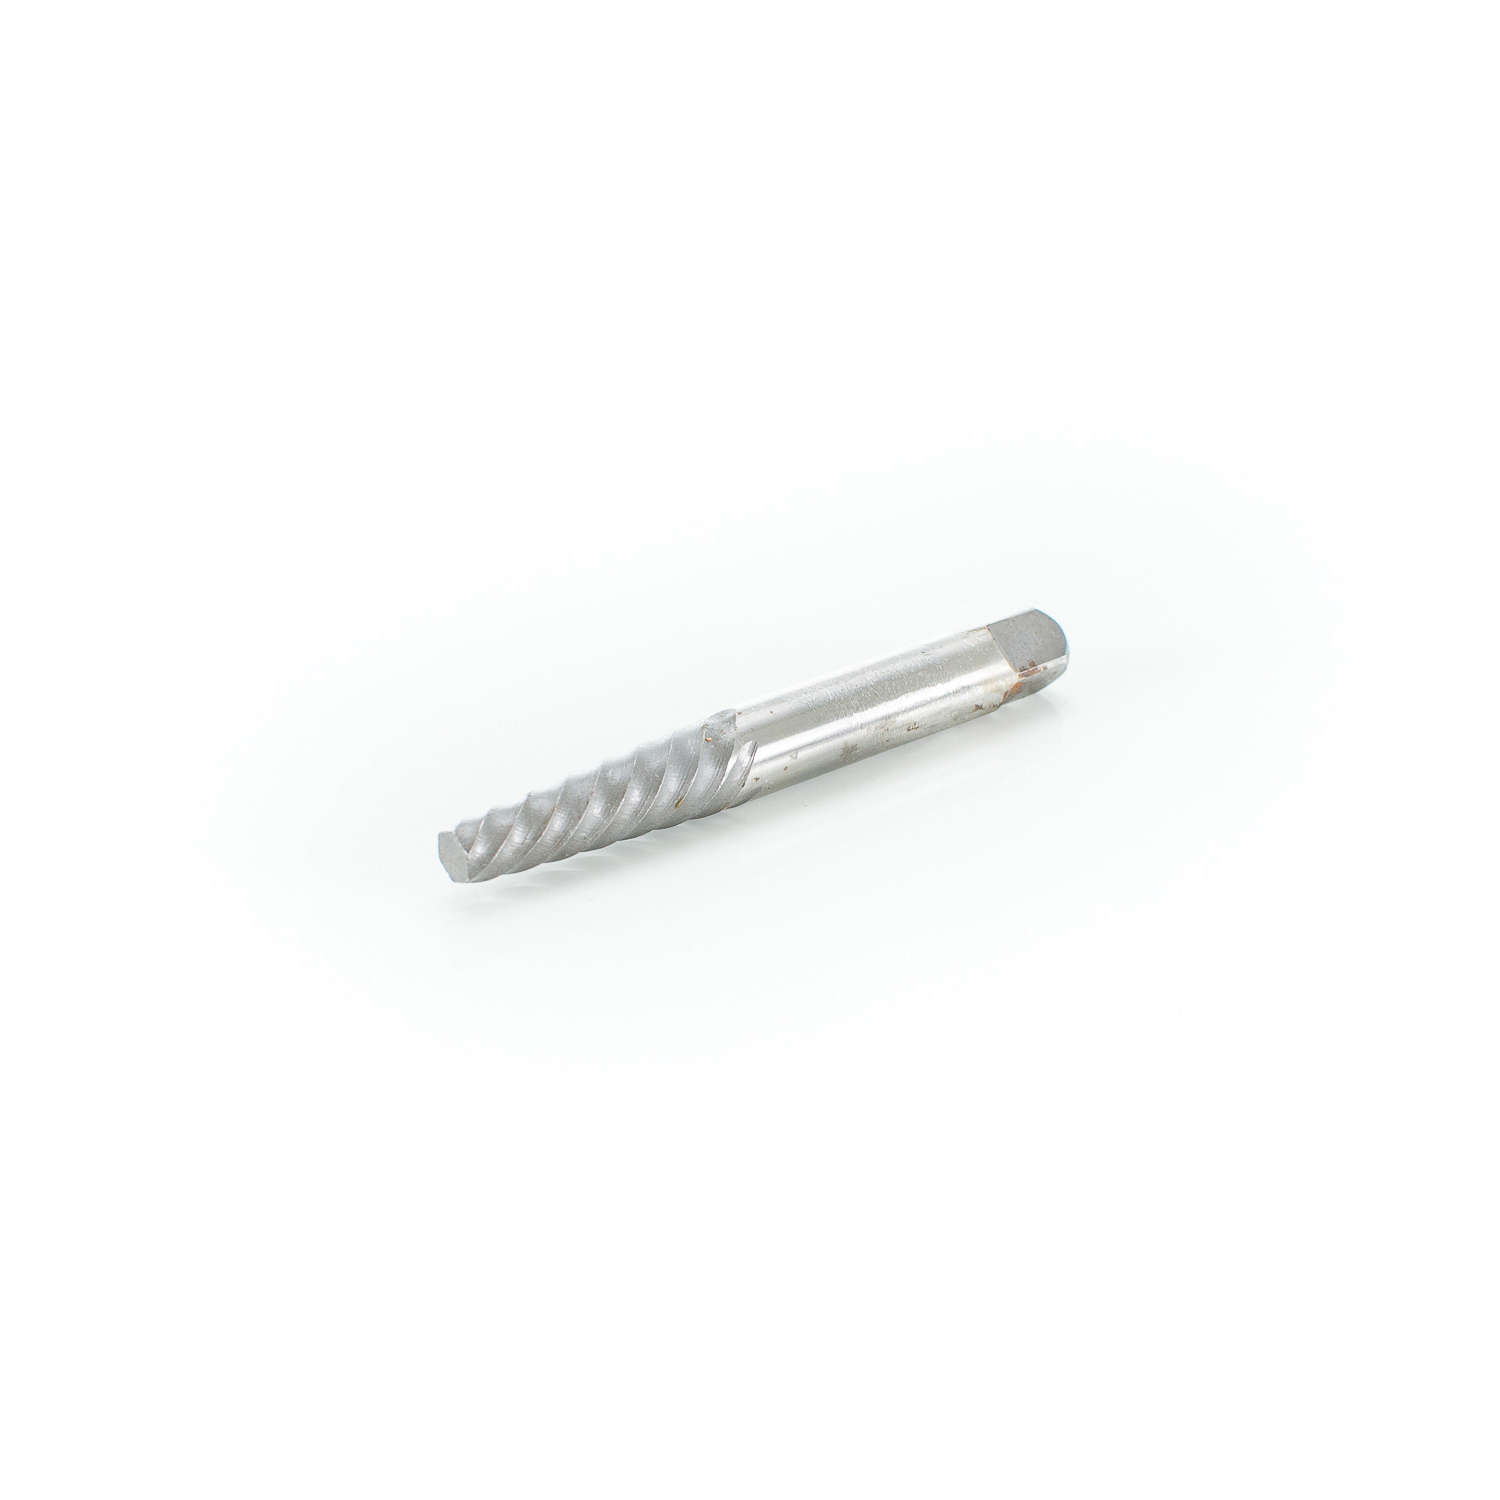 PASCO 4827 Nipple and Screw Extractor, 1/8 in Extractor, 1/4 in Drill, For Screw Size: 9/32 to 3/8 in